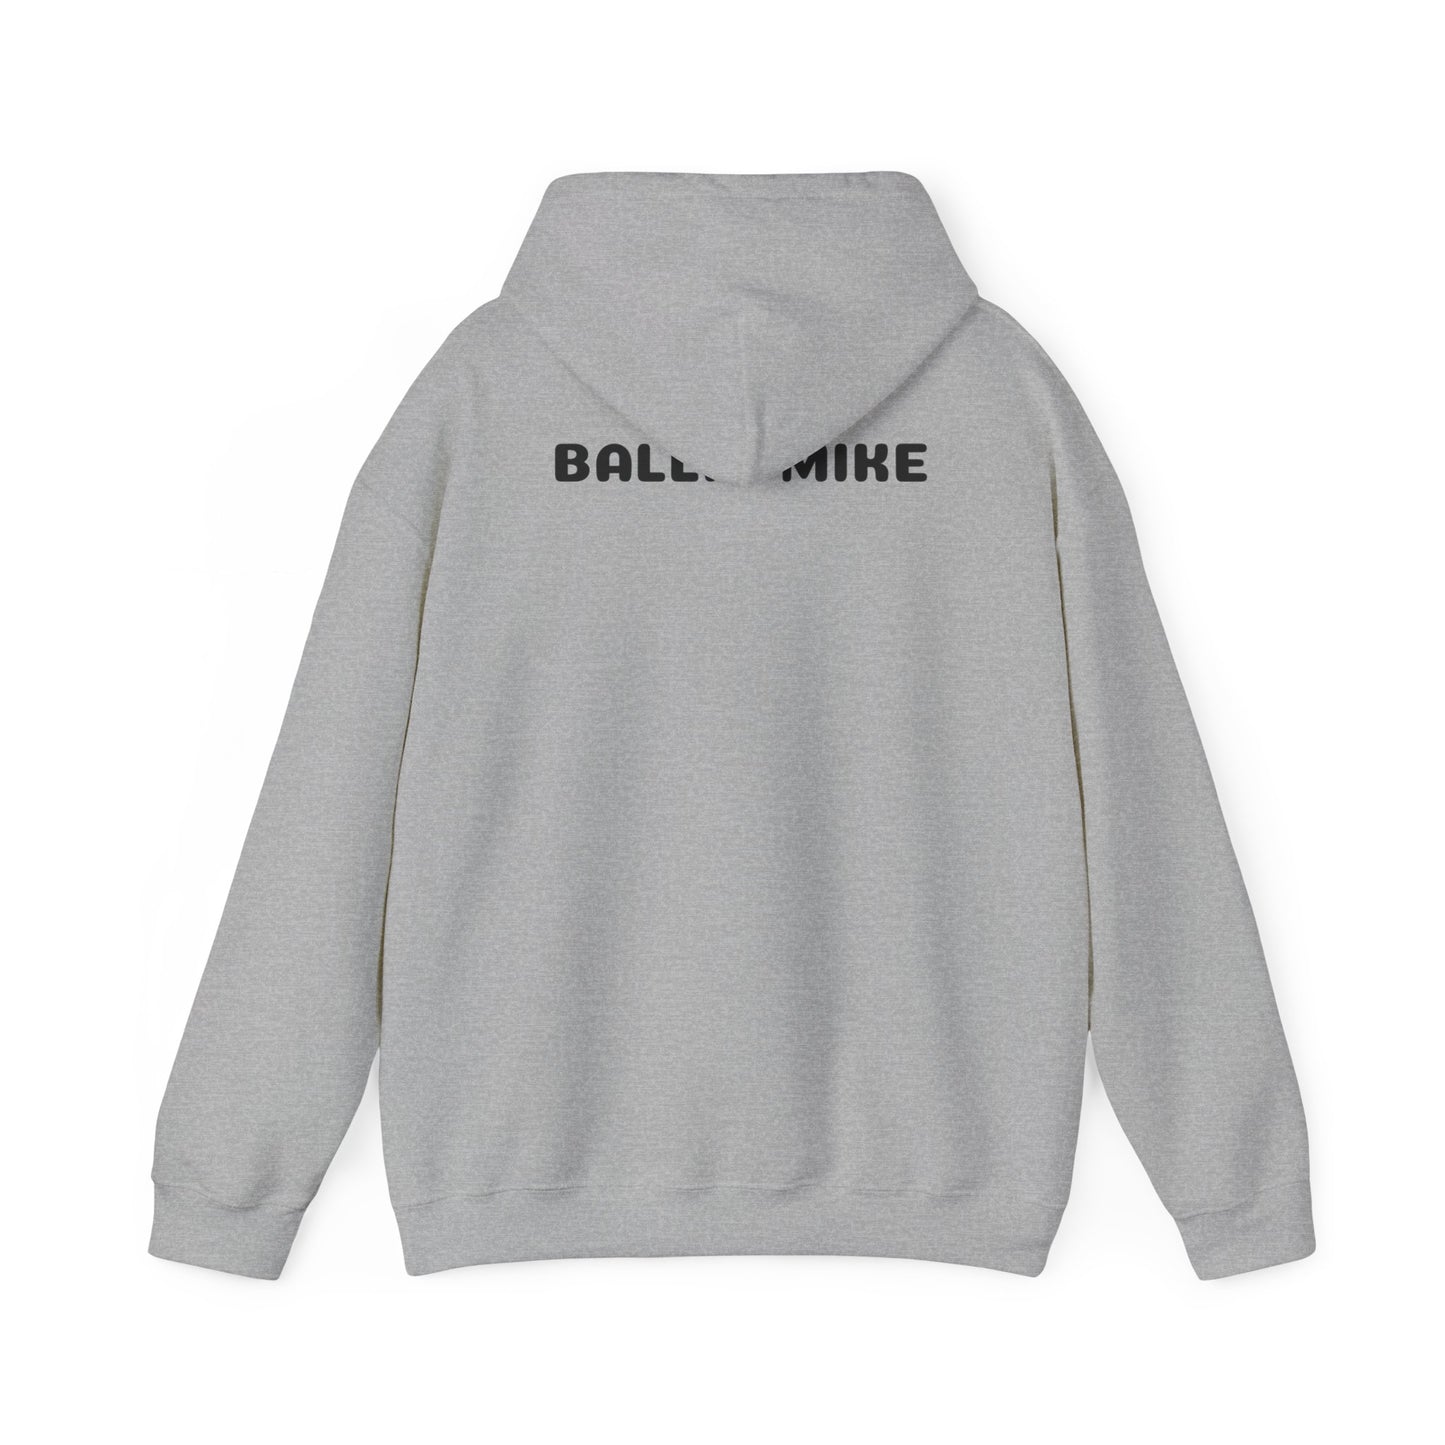 Ballin Mike - "Make Today Epic" - Unisex Hoodie